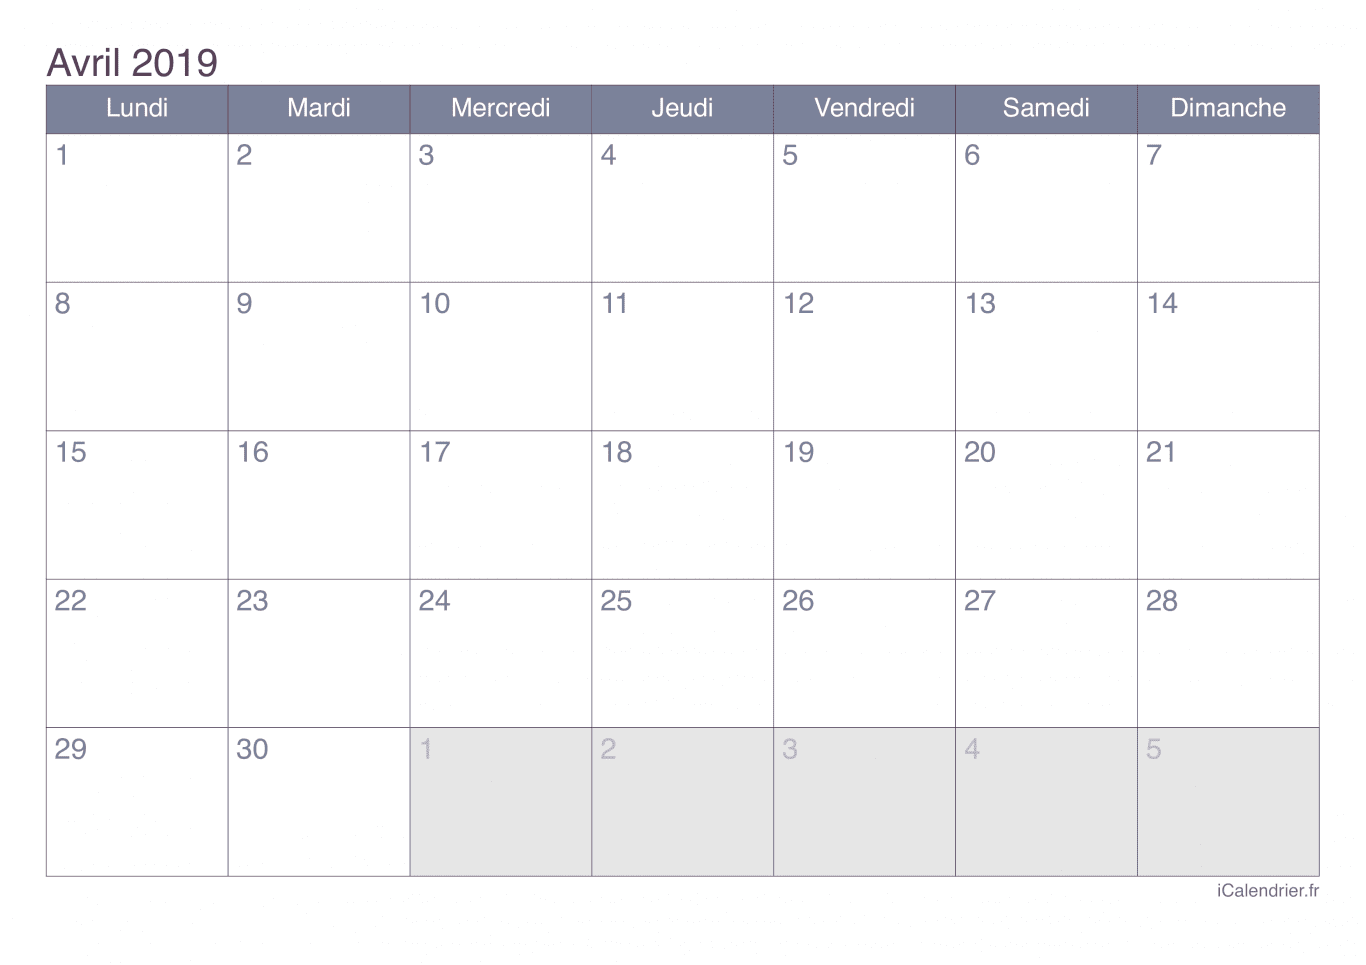 Calendrier d'avril 2019 - Office